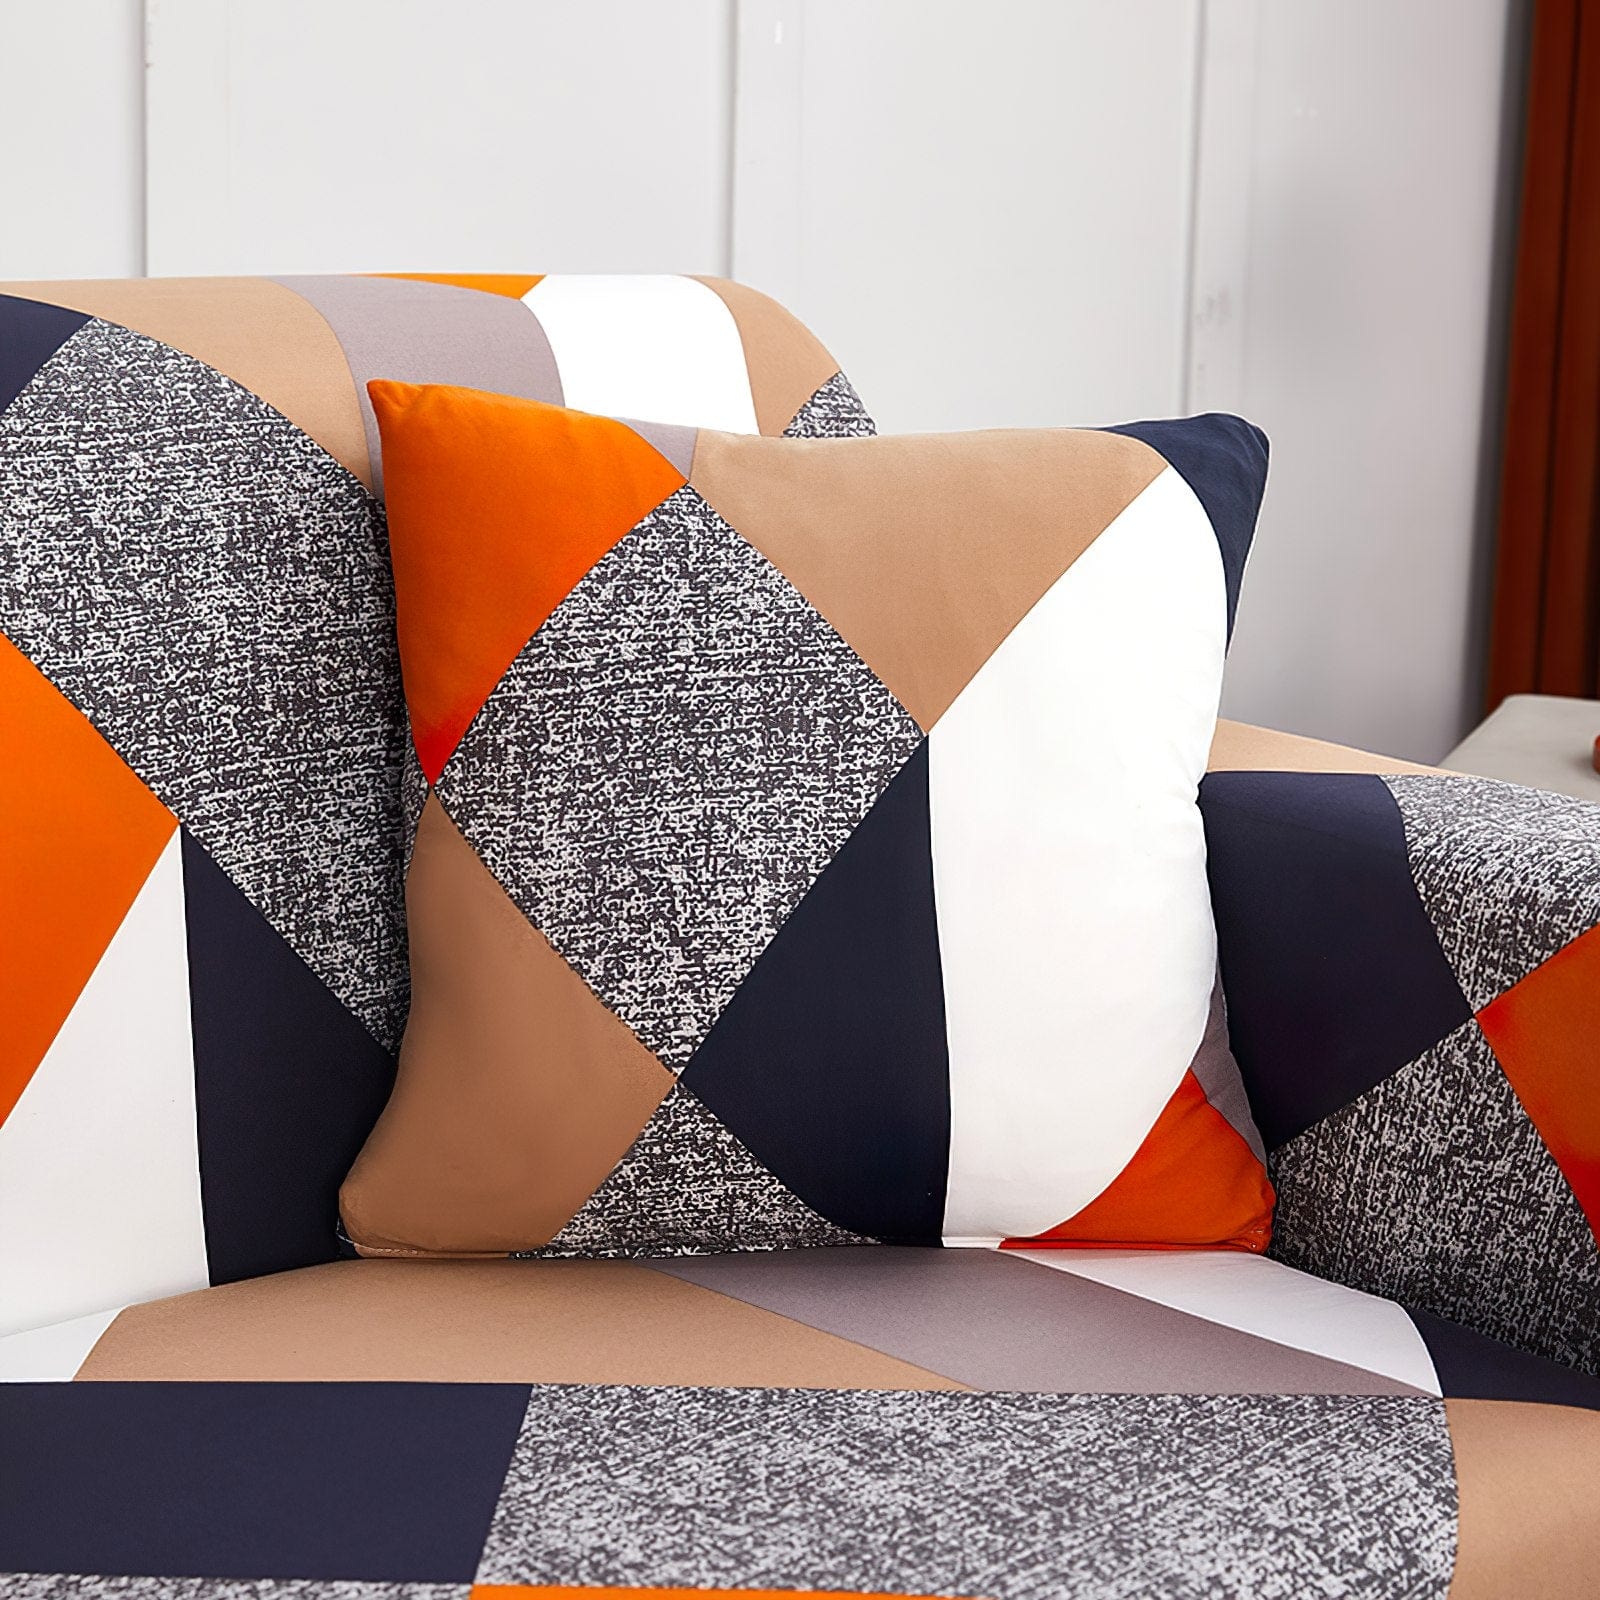 Modern - TWO PIECES - EXPANDABLE CUSHION COVERS 18" X 18" (45 CM X 45 CM)